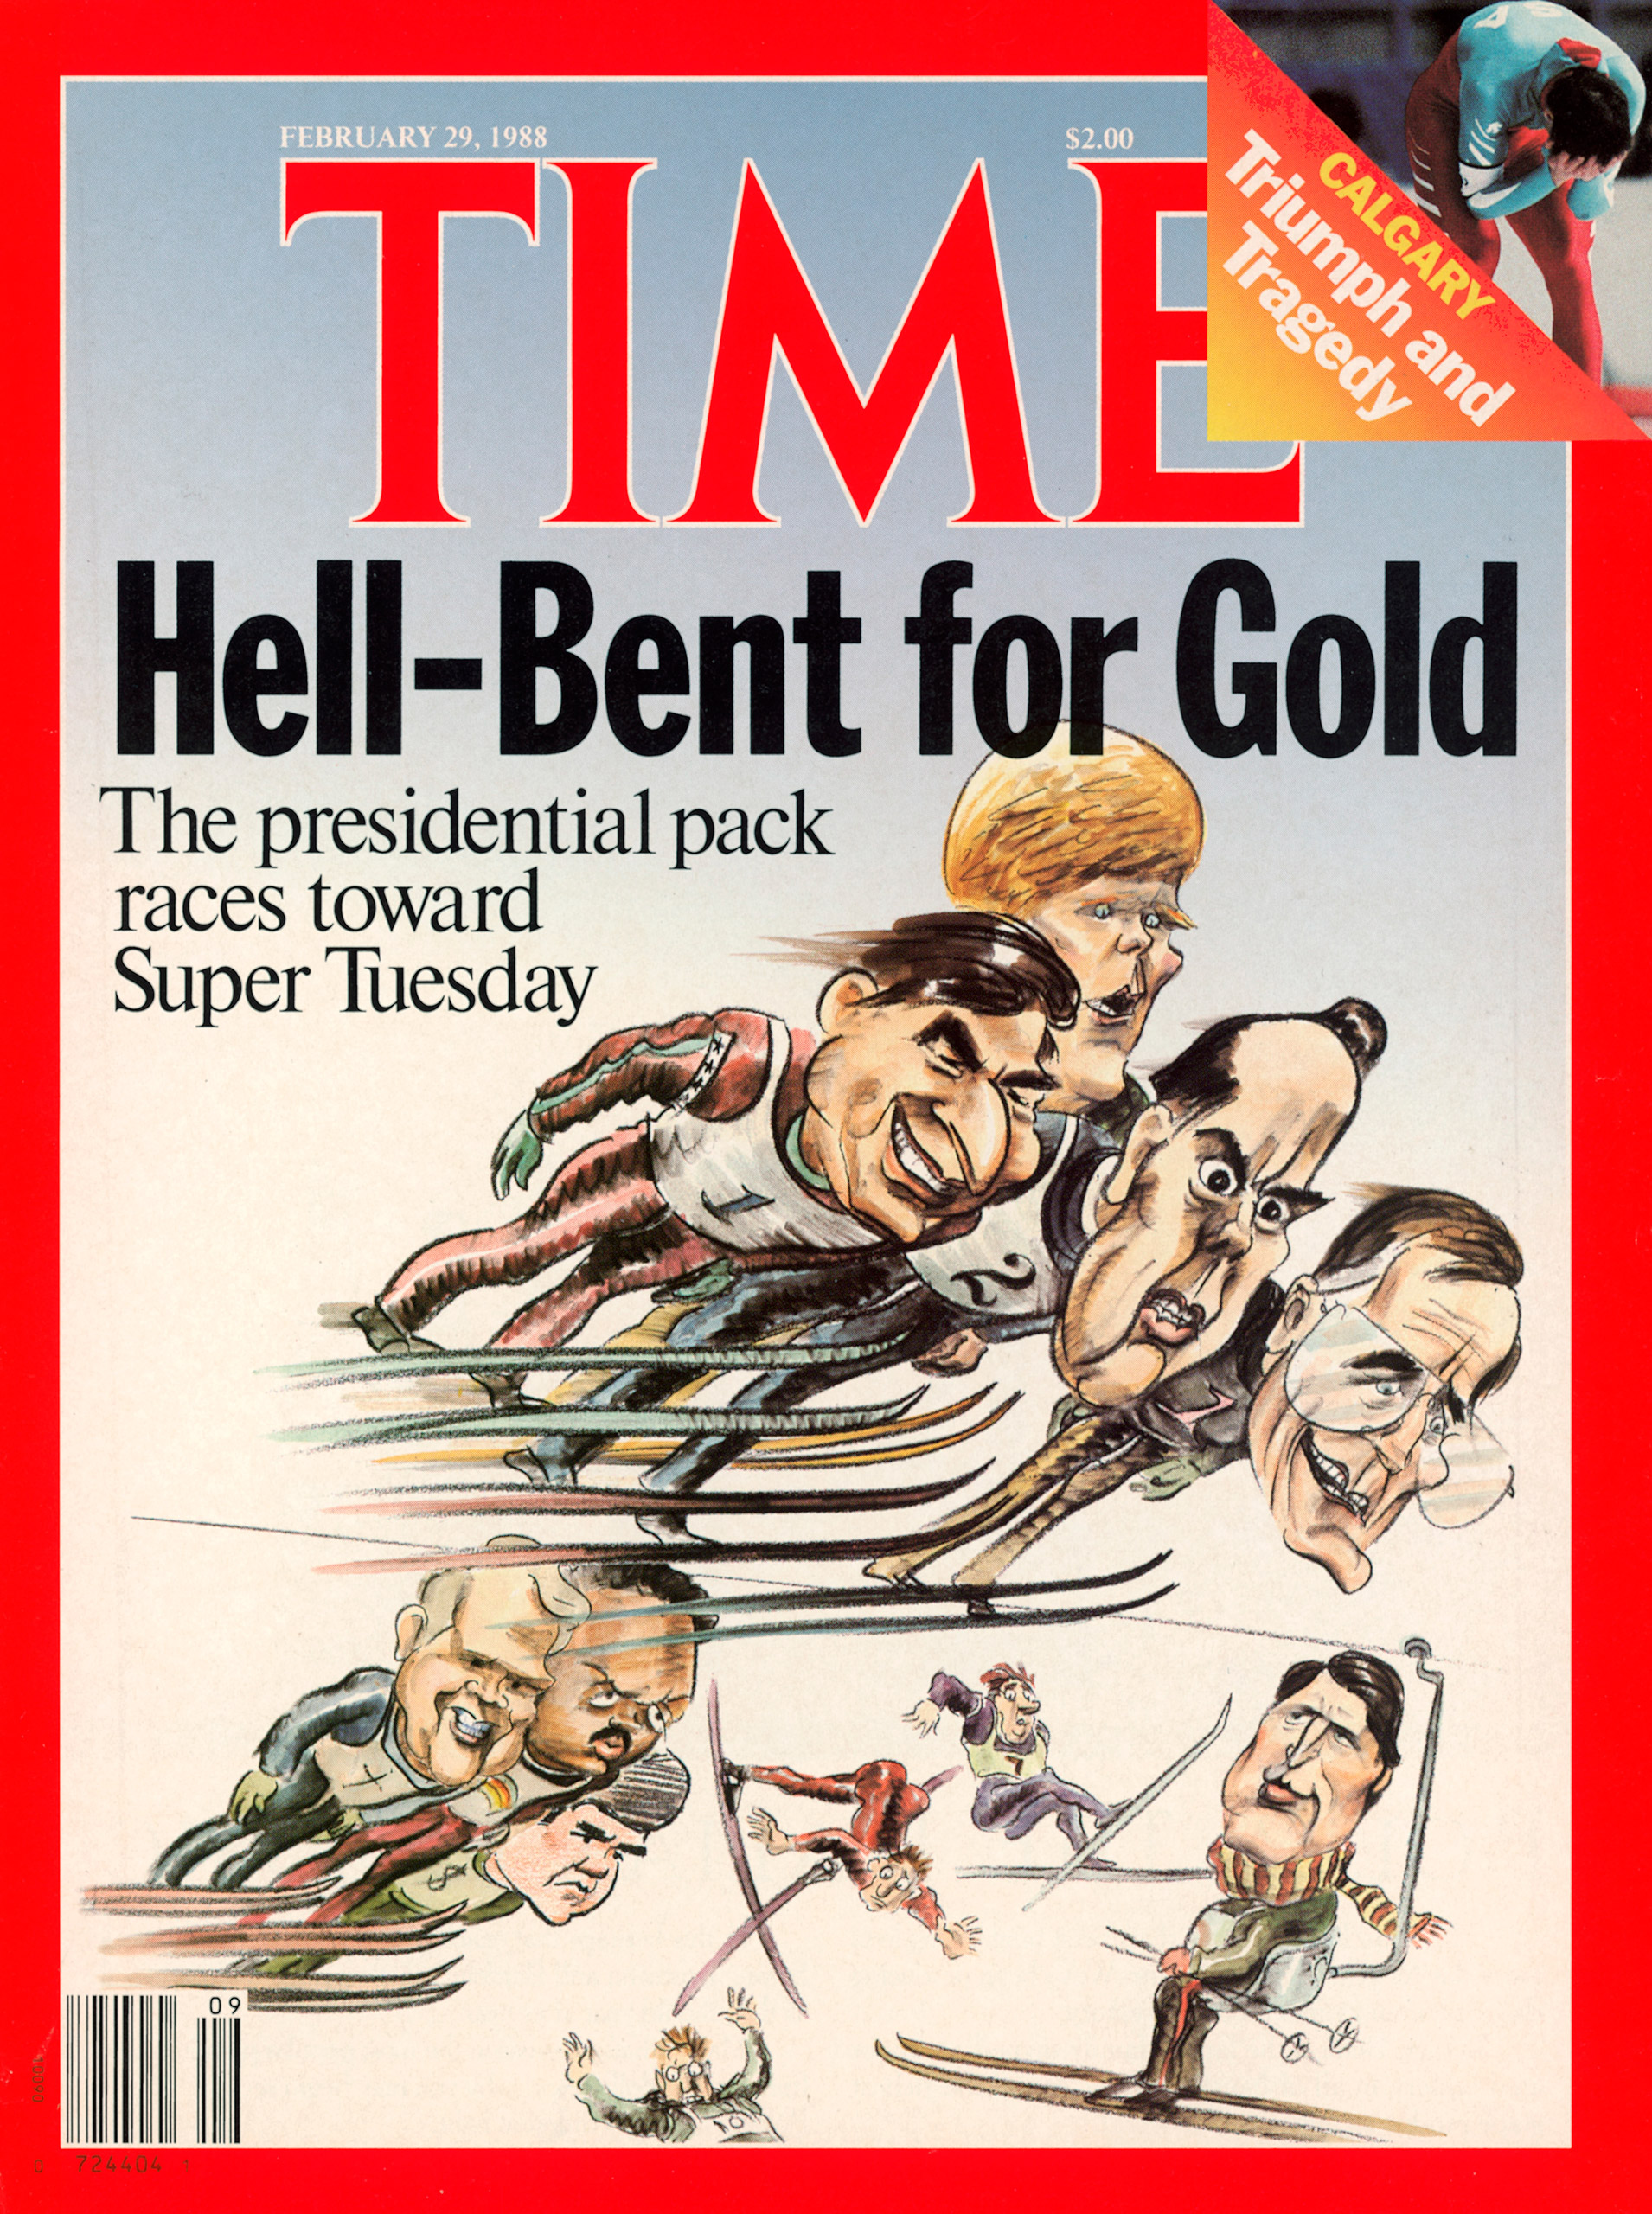 George H.W. Bush, pictured among other presidential contenders, on the Feb. 29, 1988, cover of TIME.